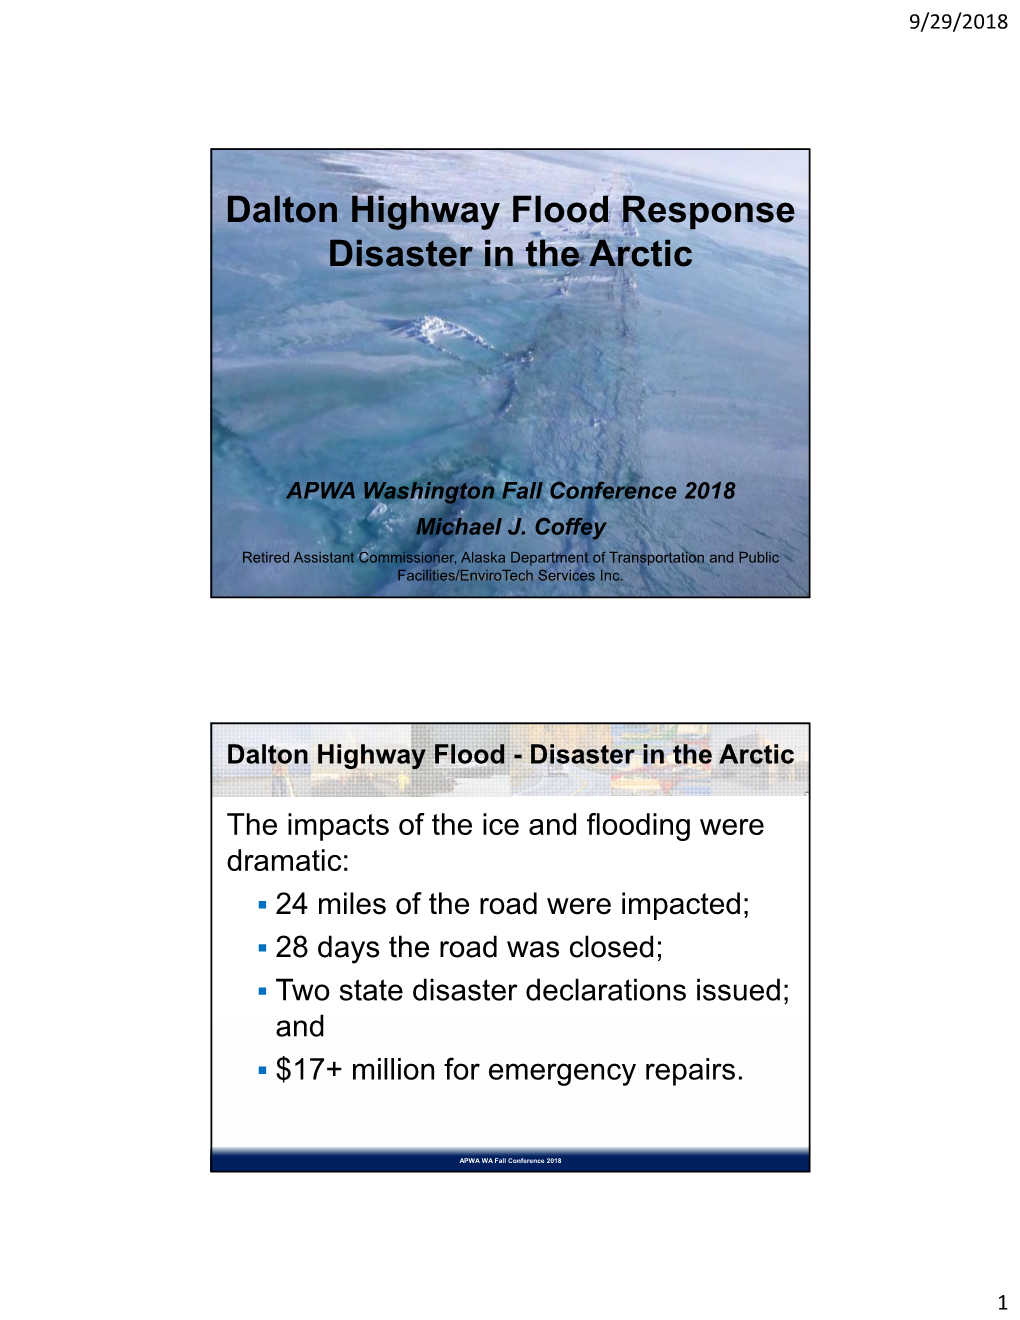 Dalton Highway Flood Response Disaster in the Arctic